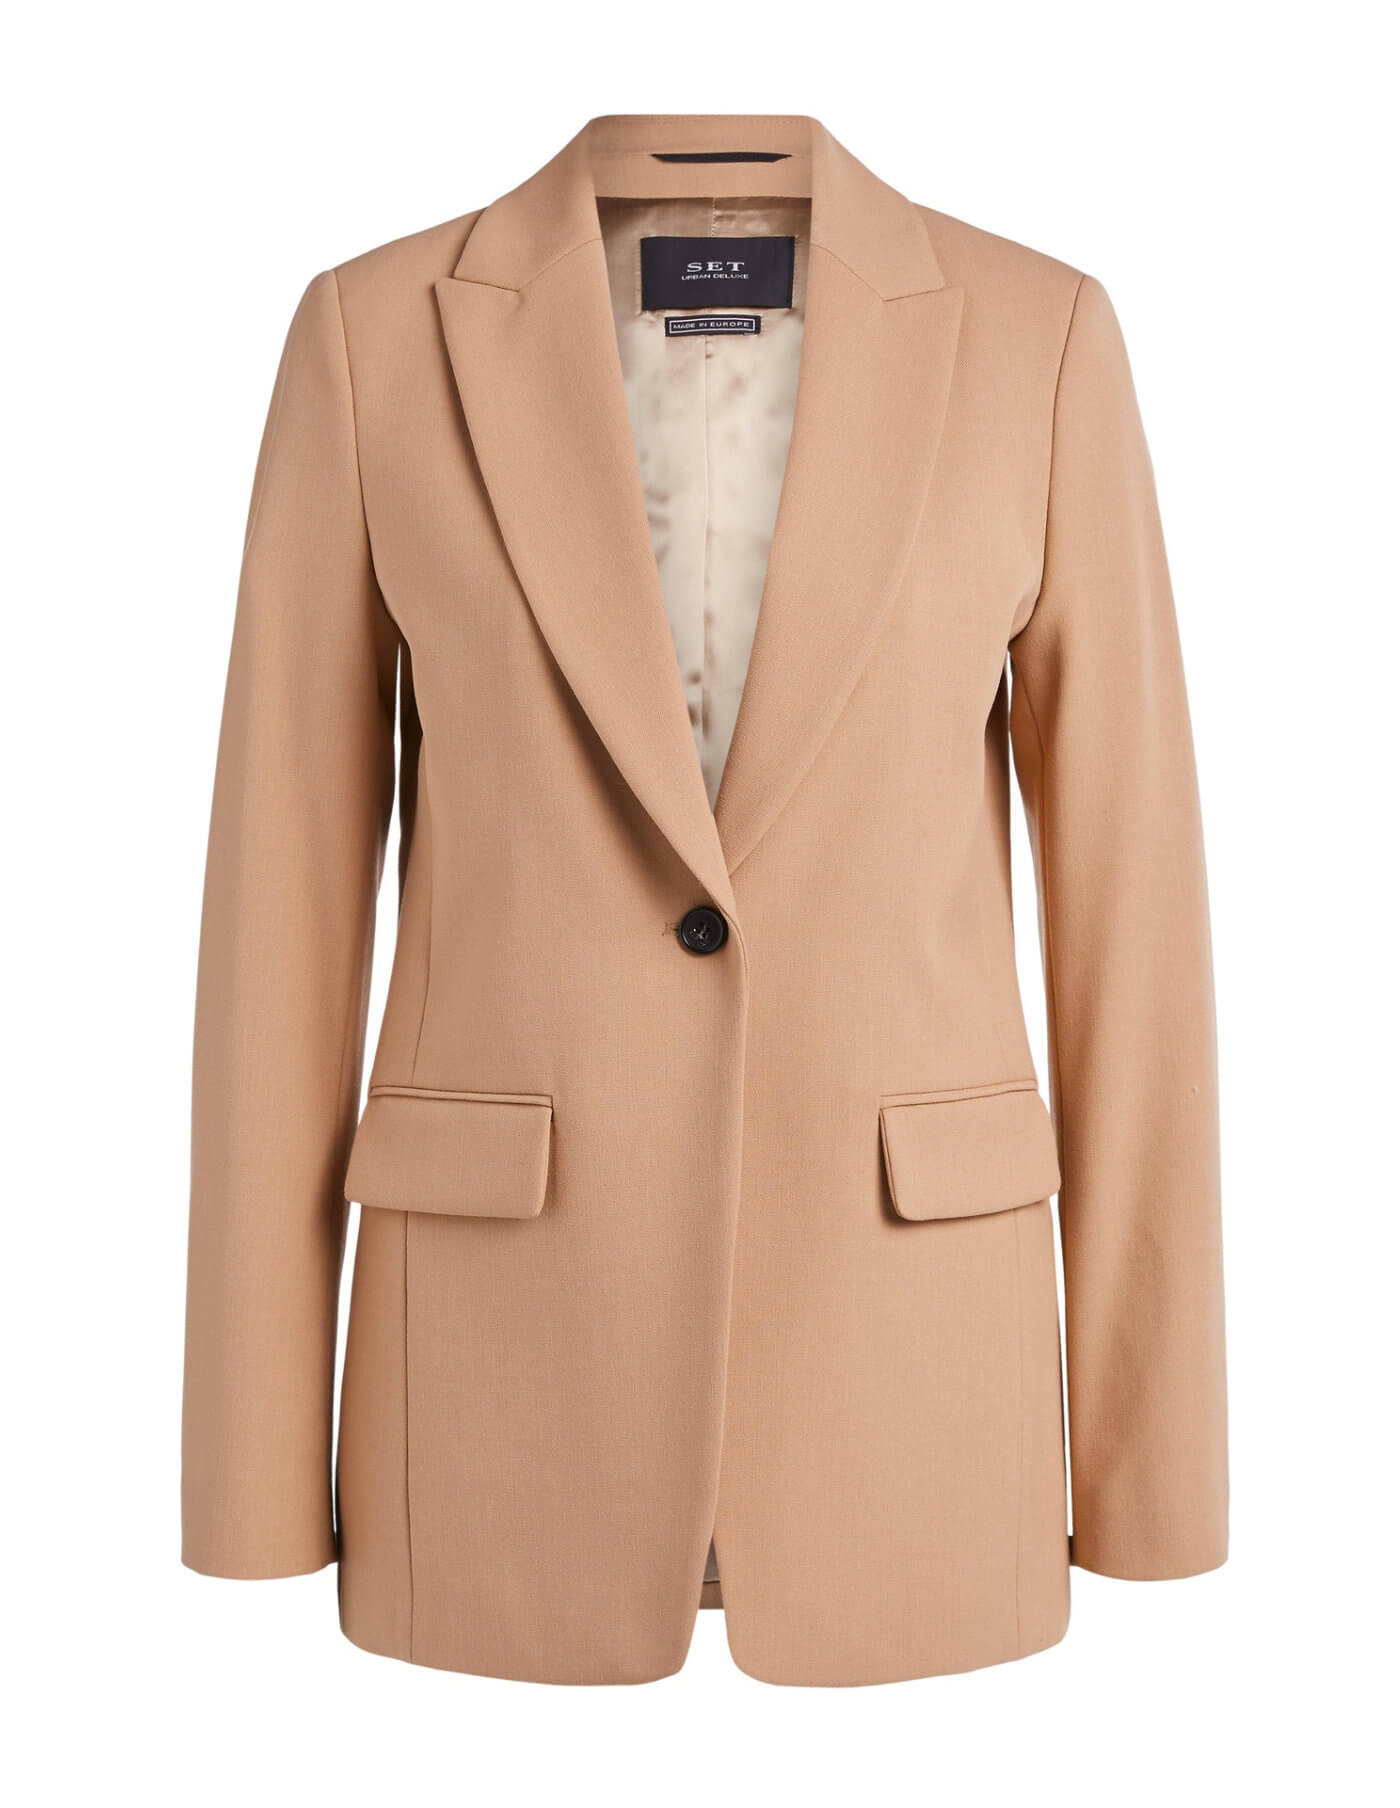 Set Mabel Blazer In Classic Camel at Storm Fashion